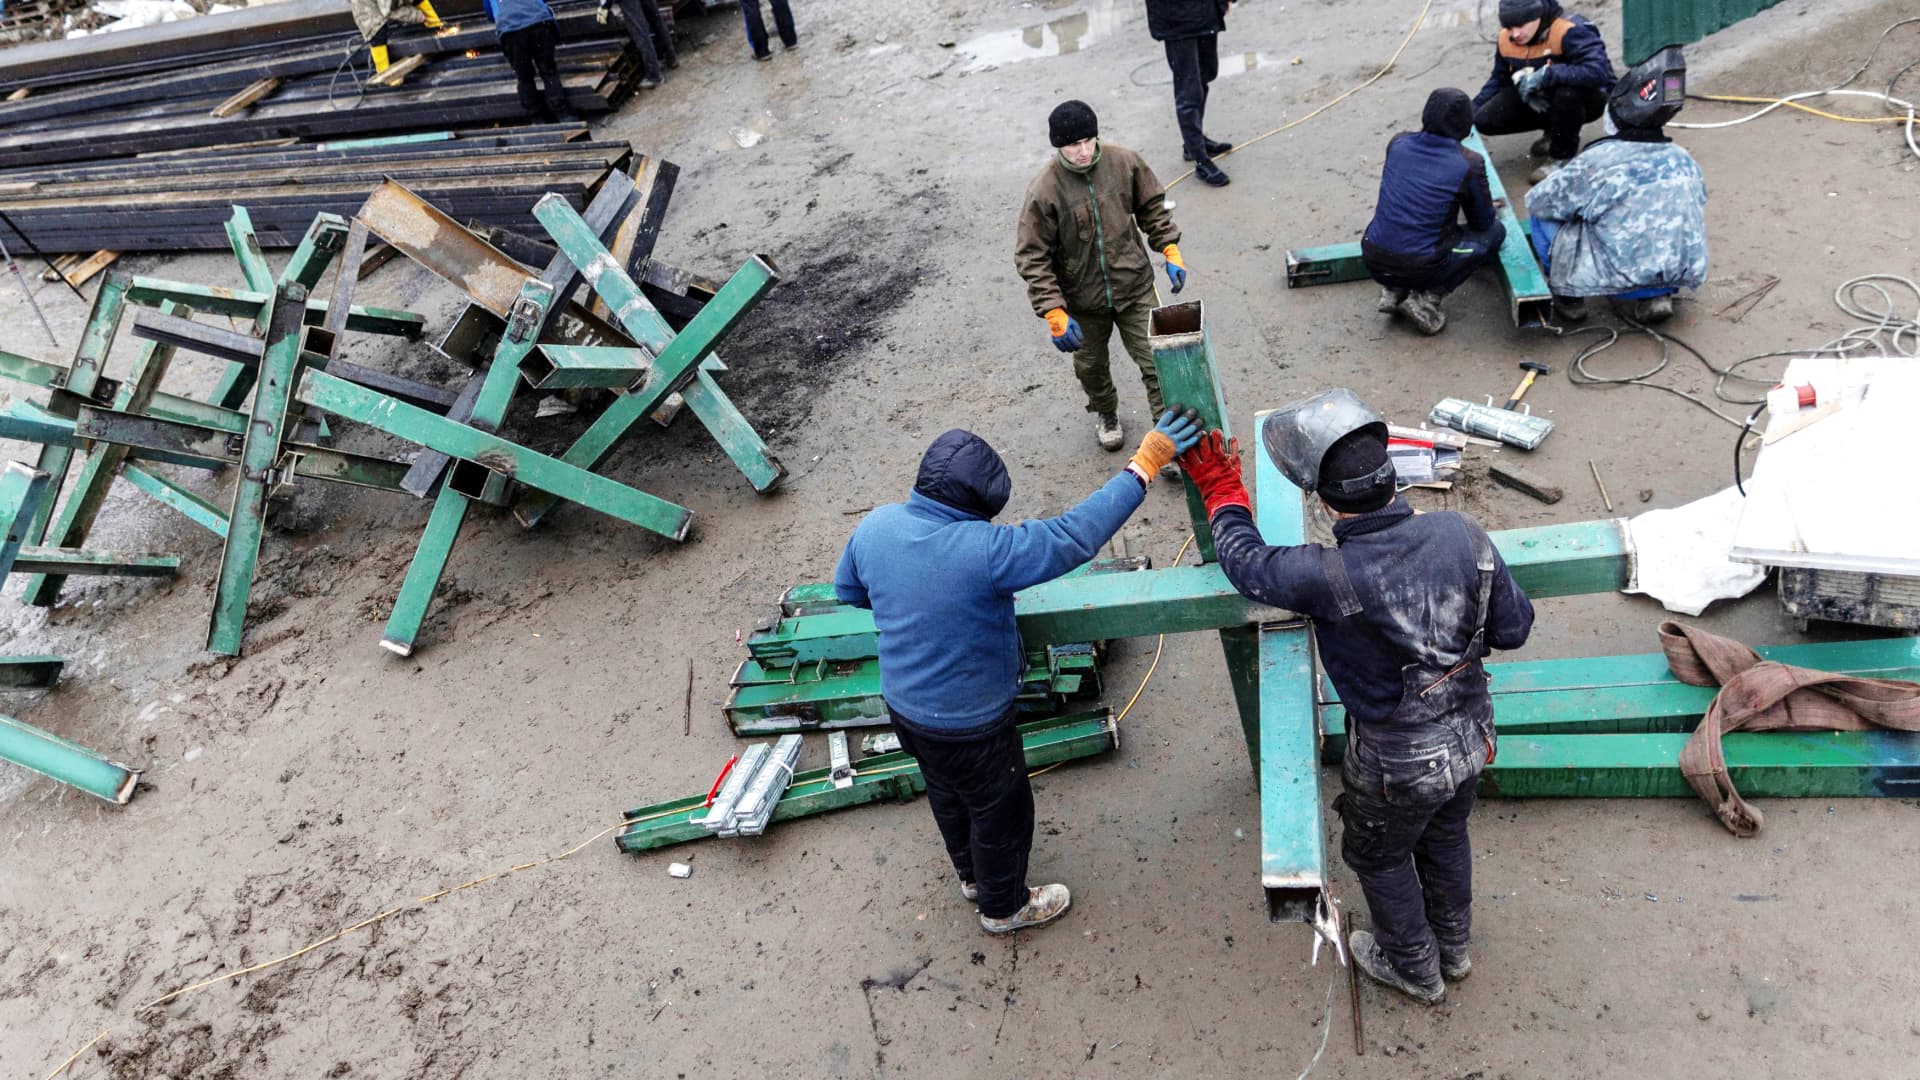 Workers from a local construction company weld anti-tanks obstacles to be place on road around Kyiv as Russia's invasion of Ukraine continues, in Kyiv, Ukraine March 3, 2022.